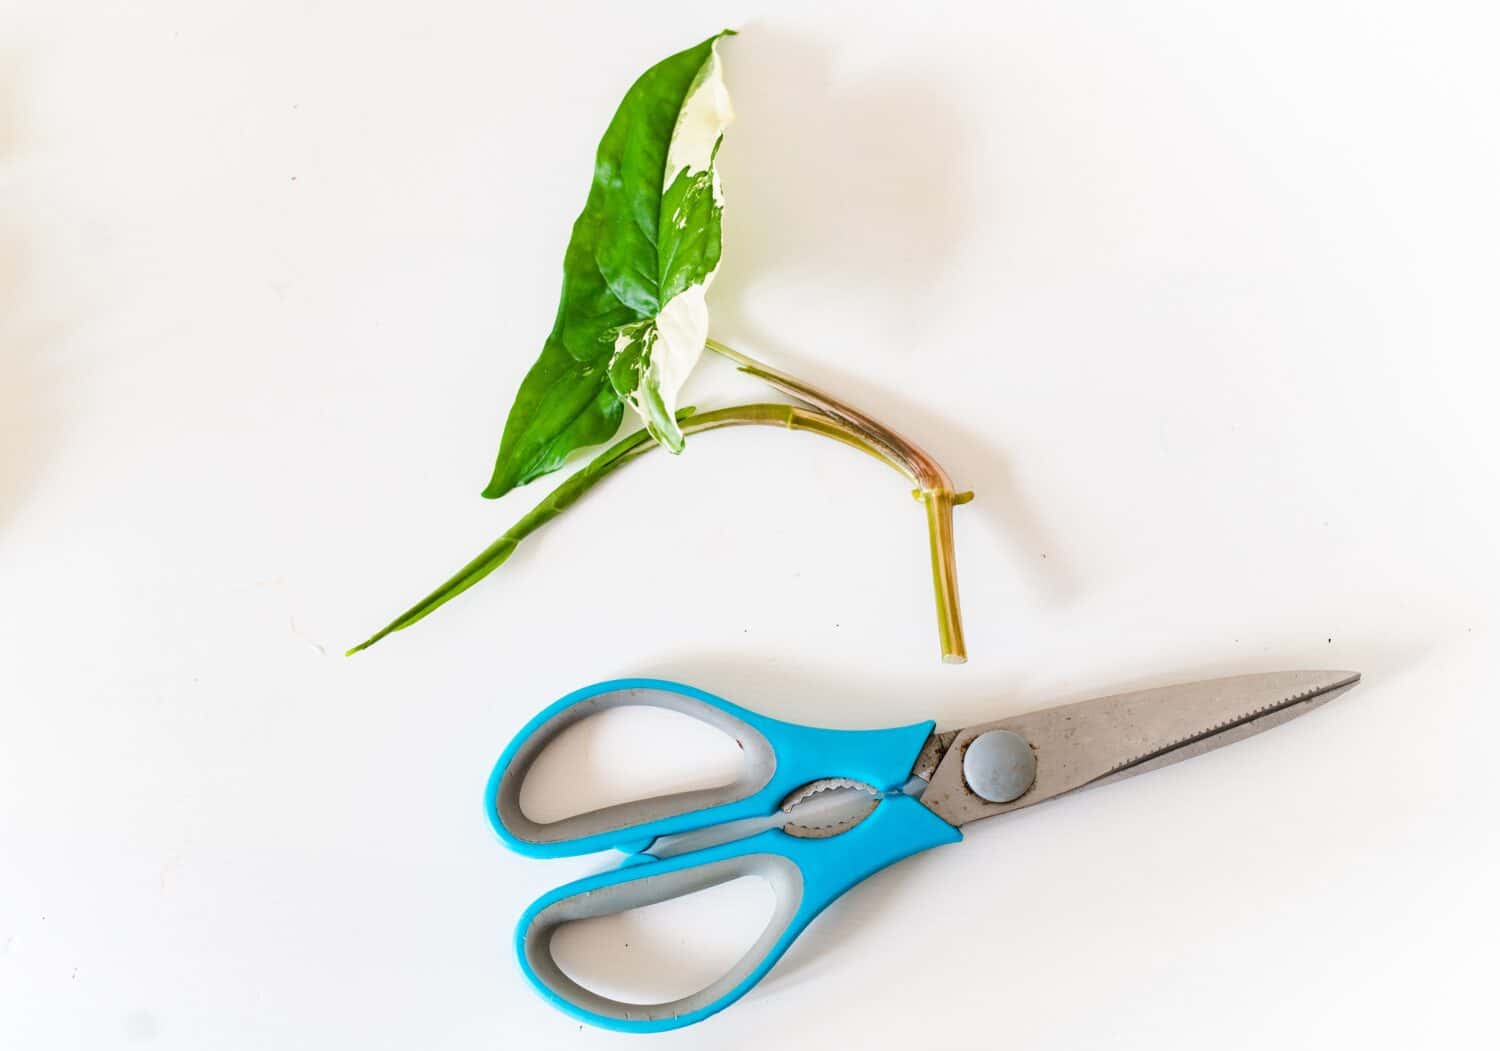 Emerald gem syngonium cutting for plant propagation. A very easy houseplant a propagate in water.